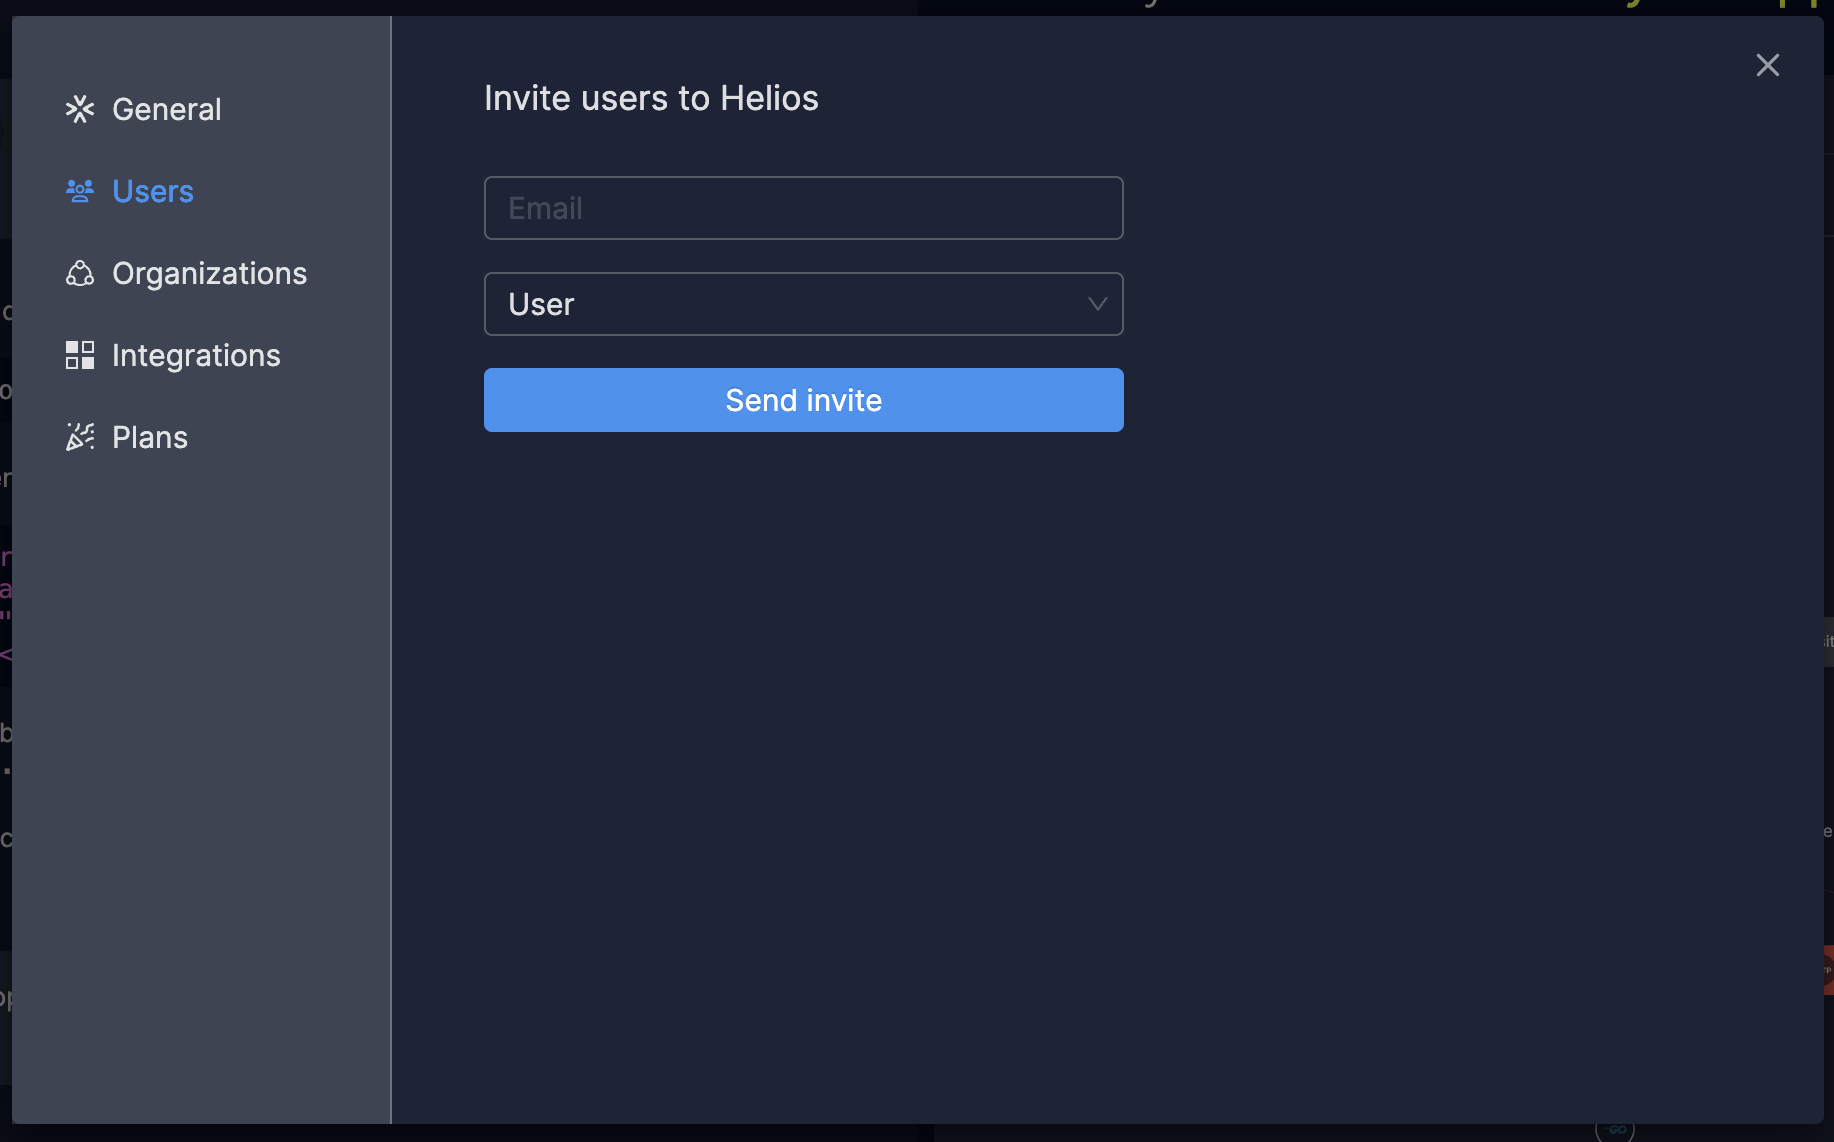 Inviting users directly from the Helios app